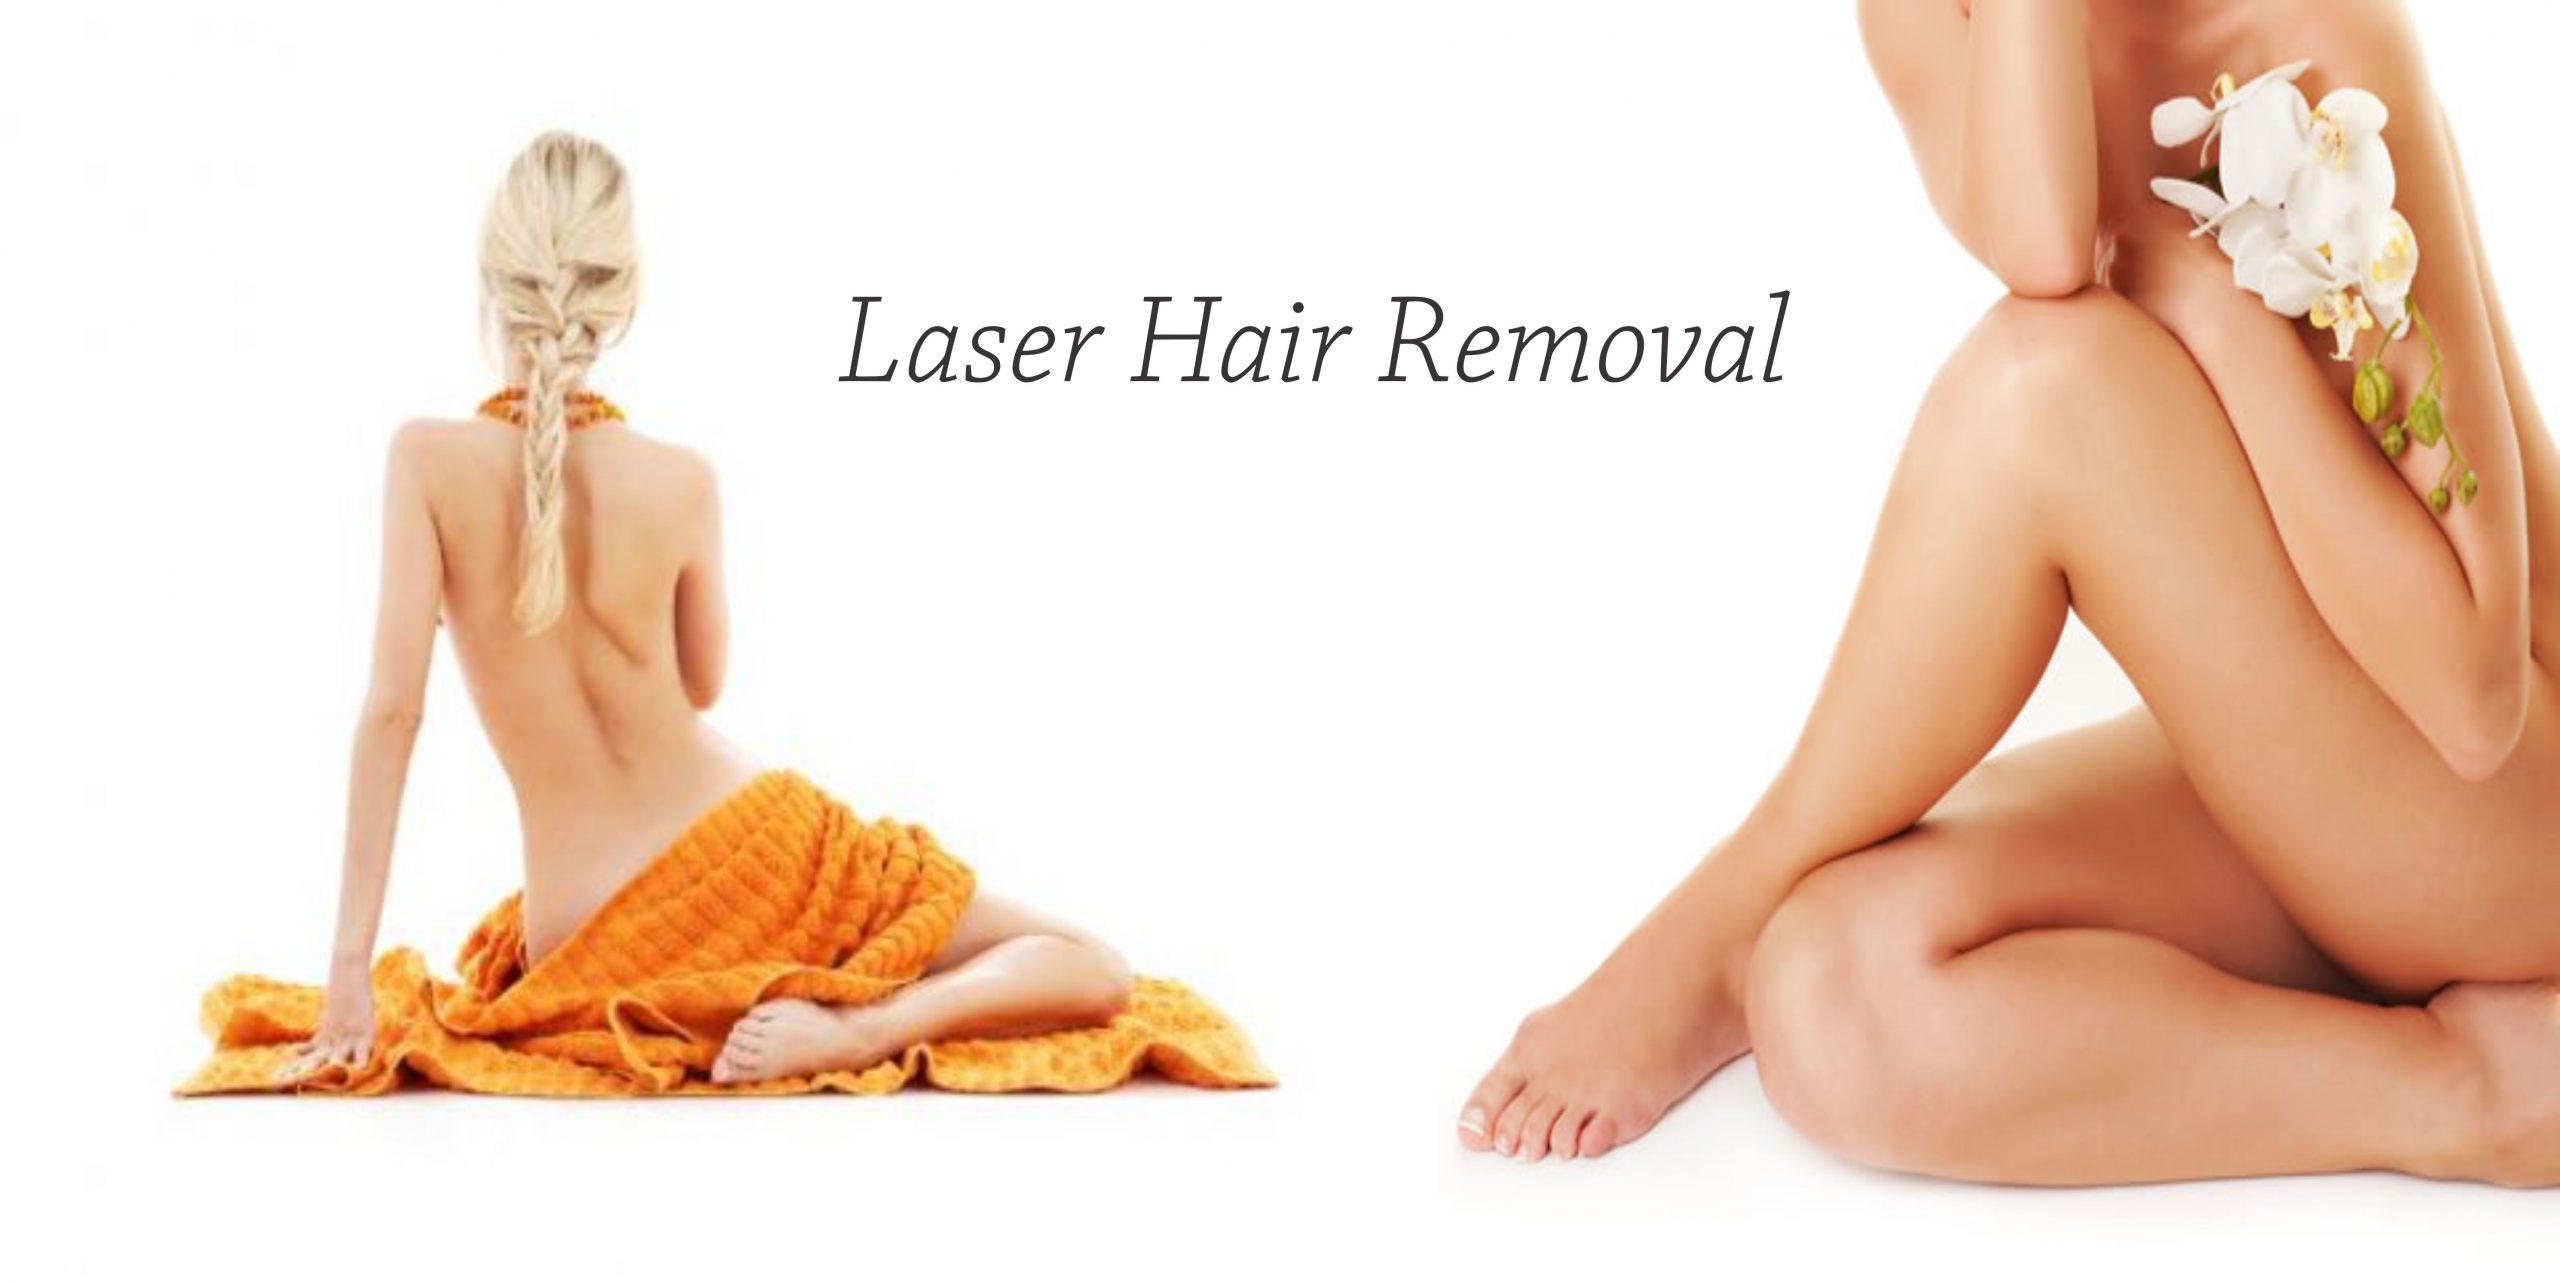 How many sessions for laser hair removal